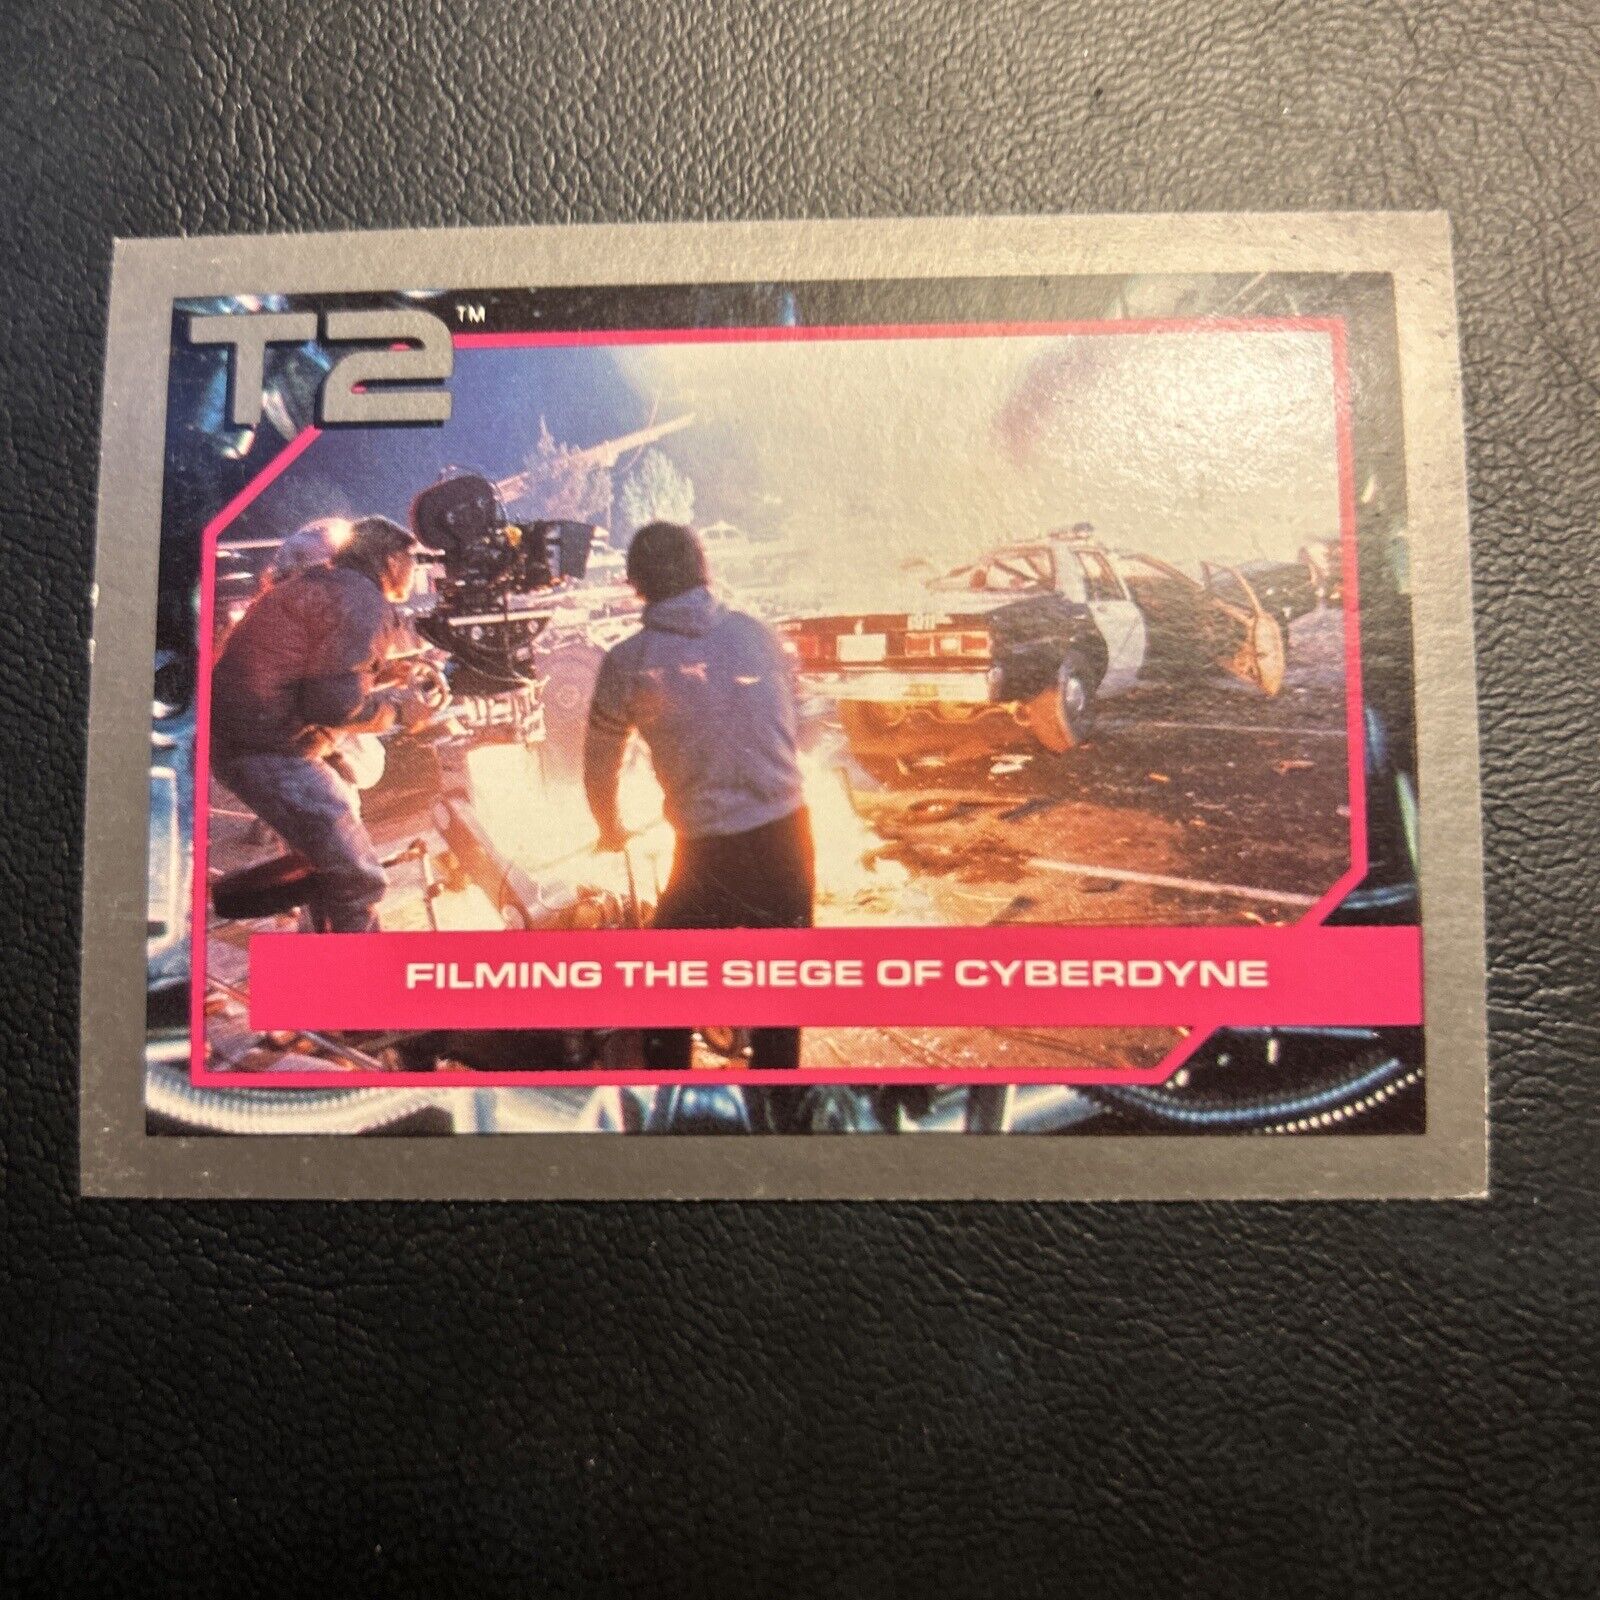 Jb5d T2 terminator 2 Judgment Day, 1991 #79 Filming The Siege Of Cyberdyne